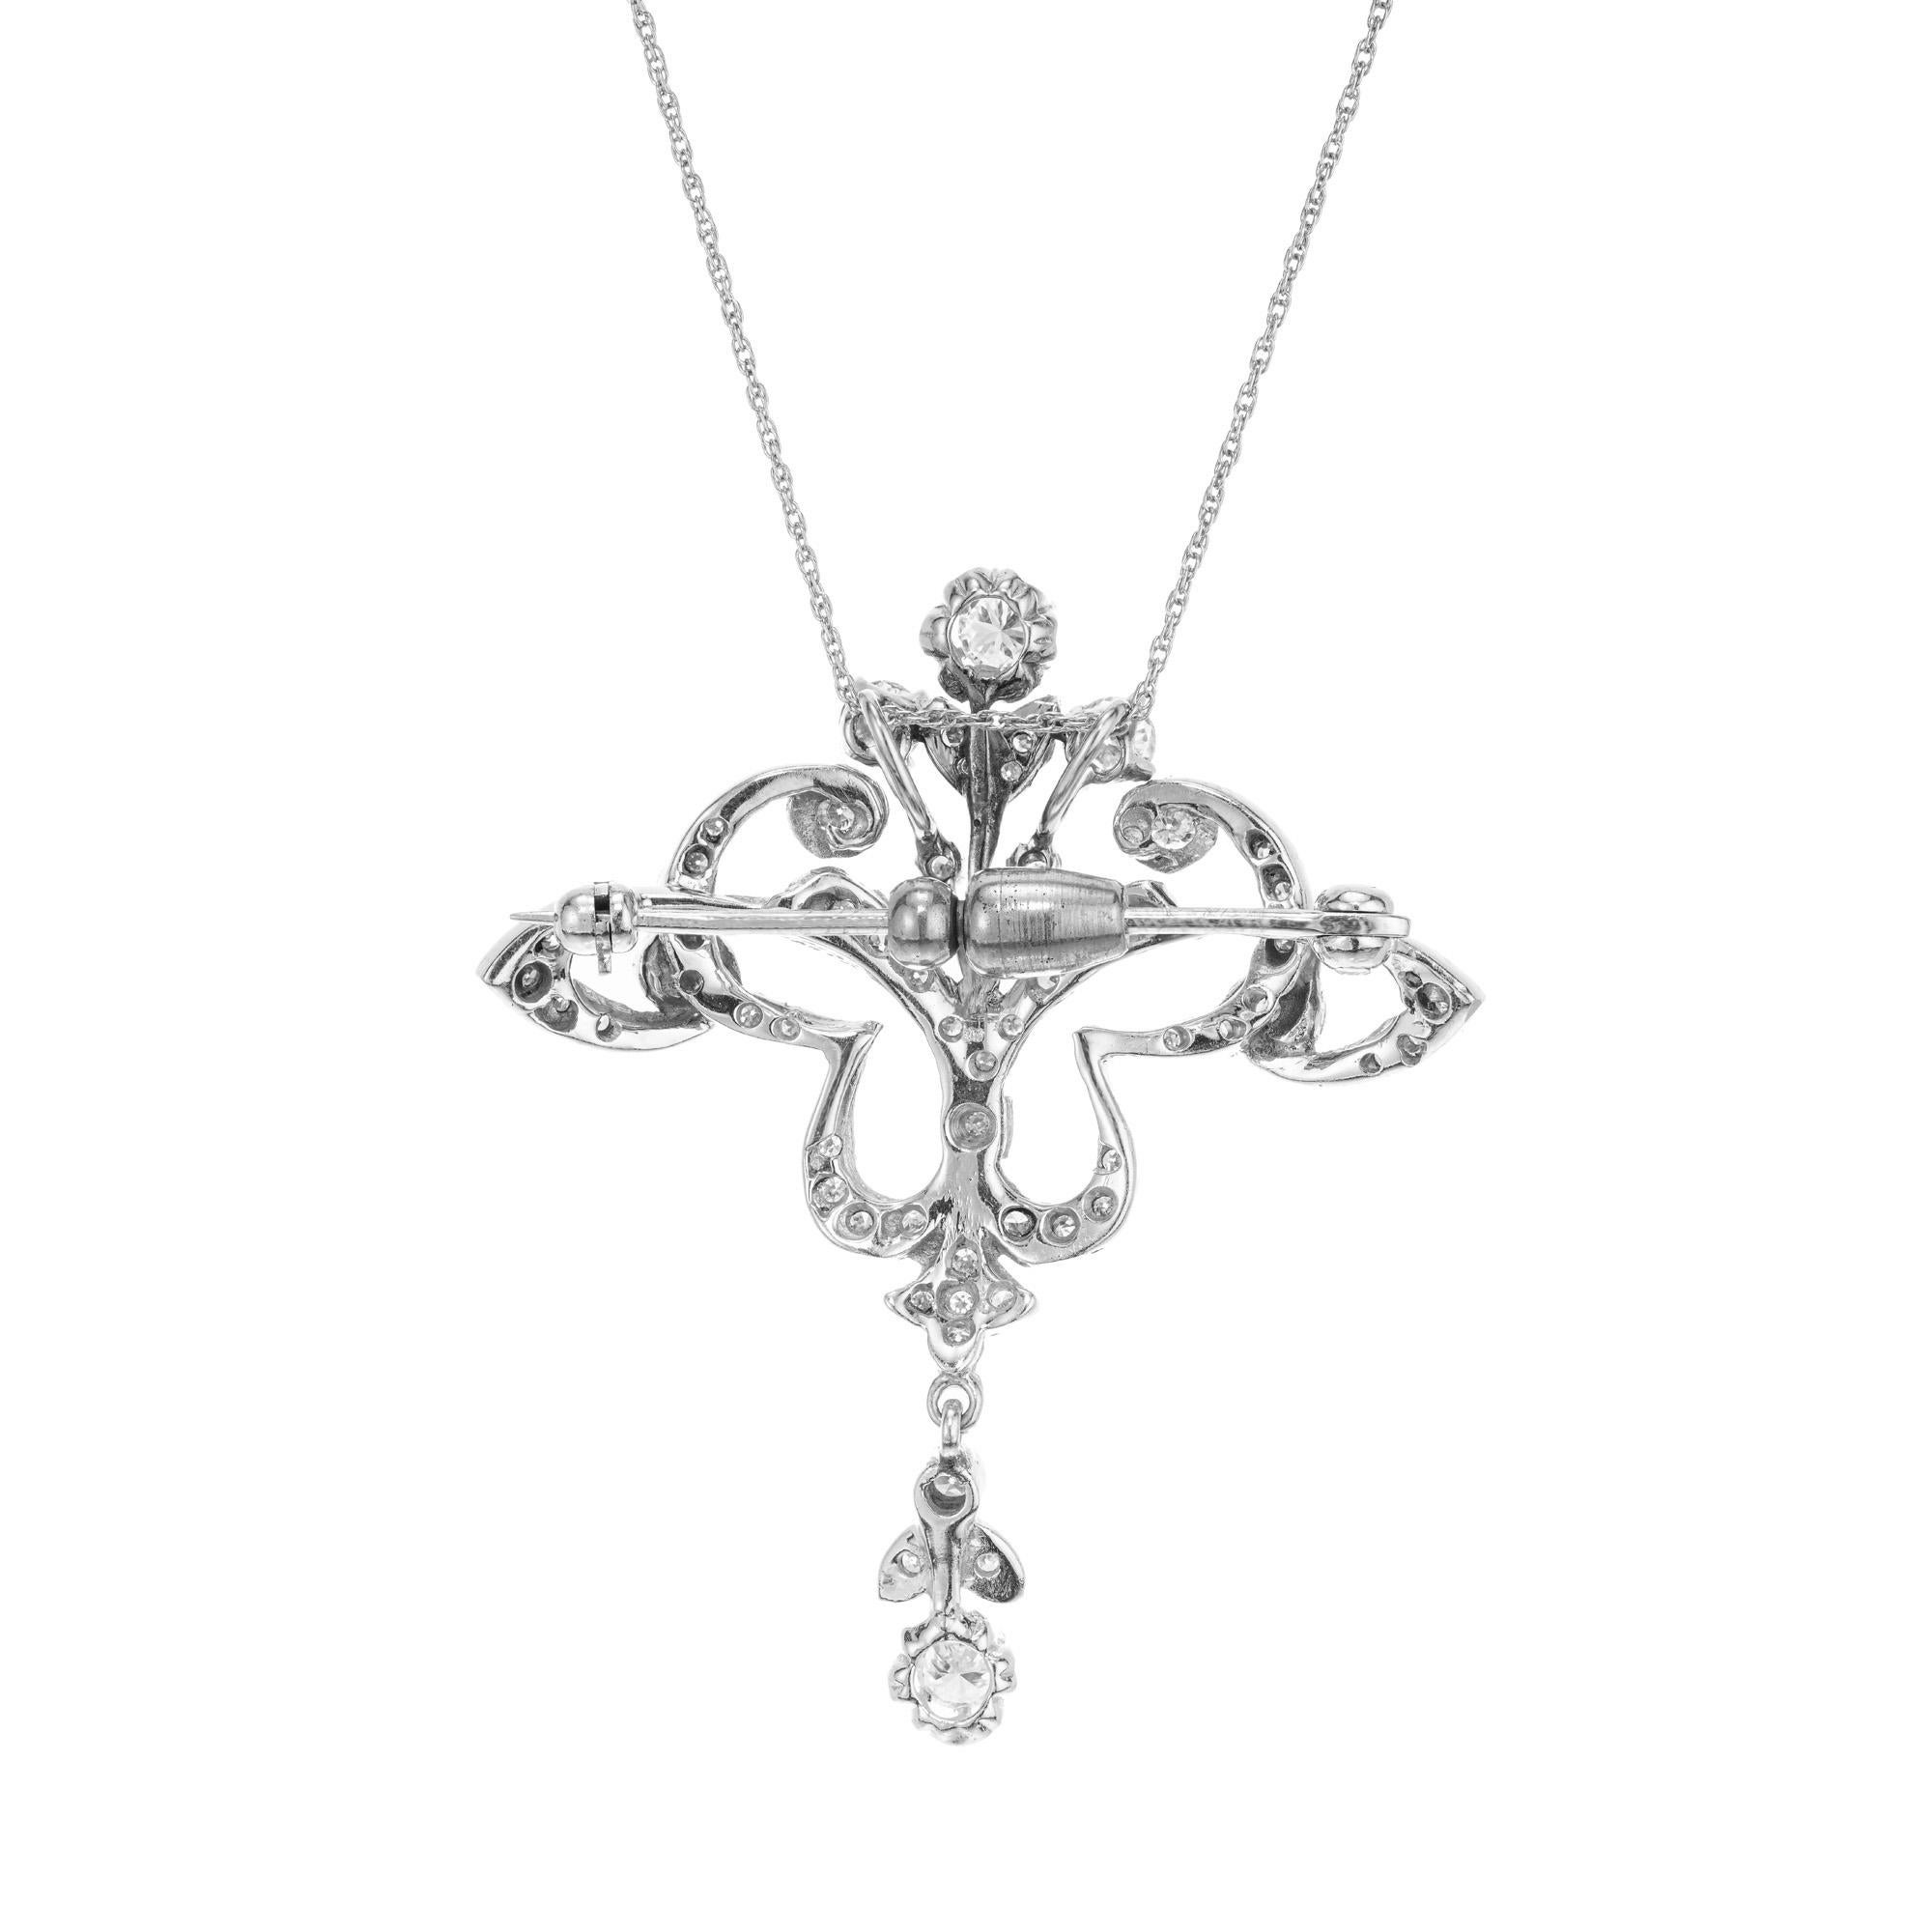 Round Cut 1.46 Carat Diamond White Gold Brooch Pendant Necklace For Sale